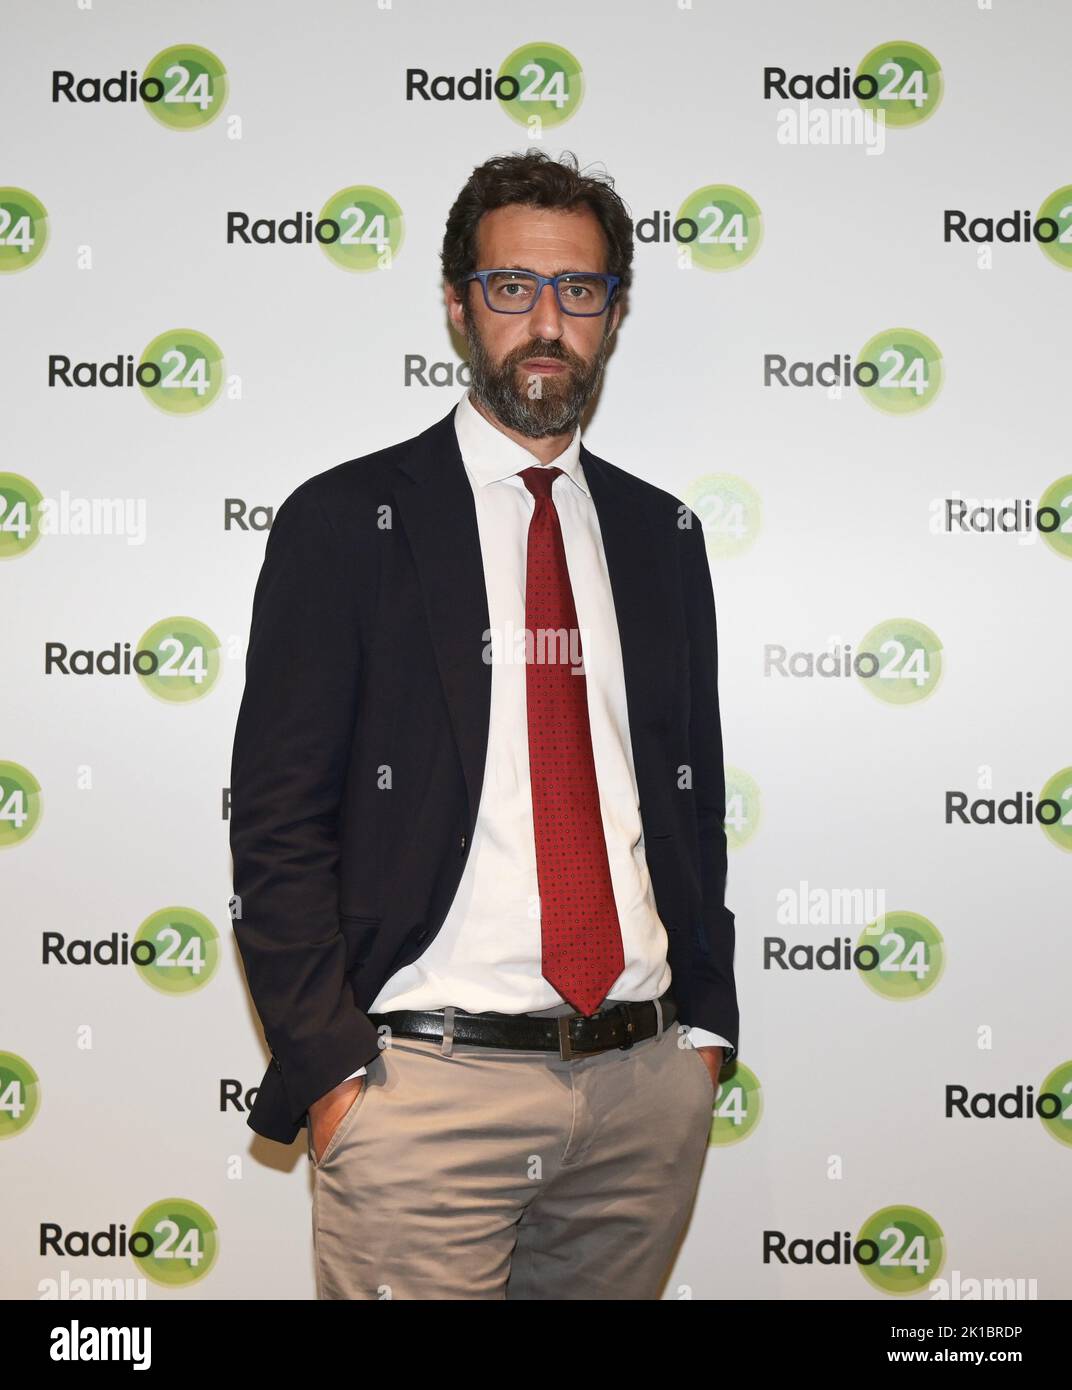 Milan, Italy Radio 24 at the Sole24Ore headquarters presents its autumn  winter 2022-23 photocall with directors, conductors In the picture: Manuel  Agnelli, Fabio Tamburini director Il Sole 24 Ore Radiocor Radio 24